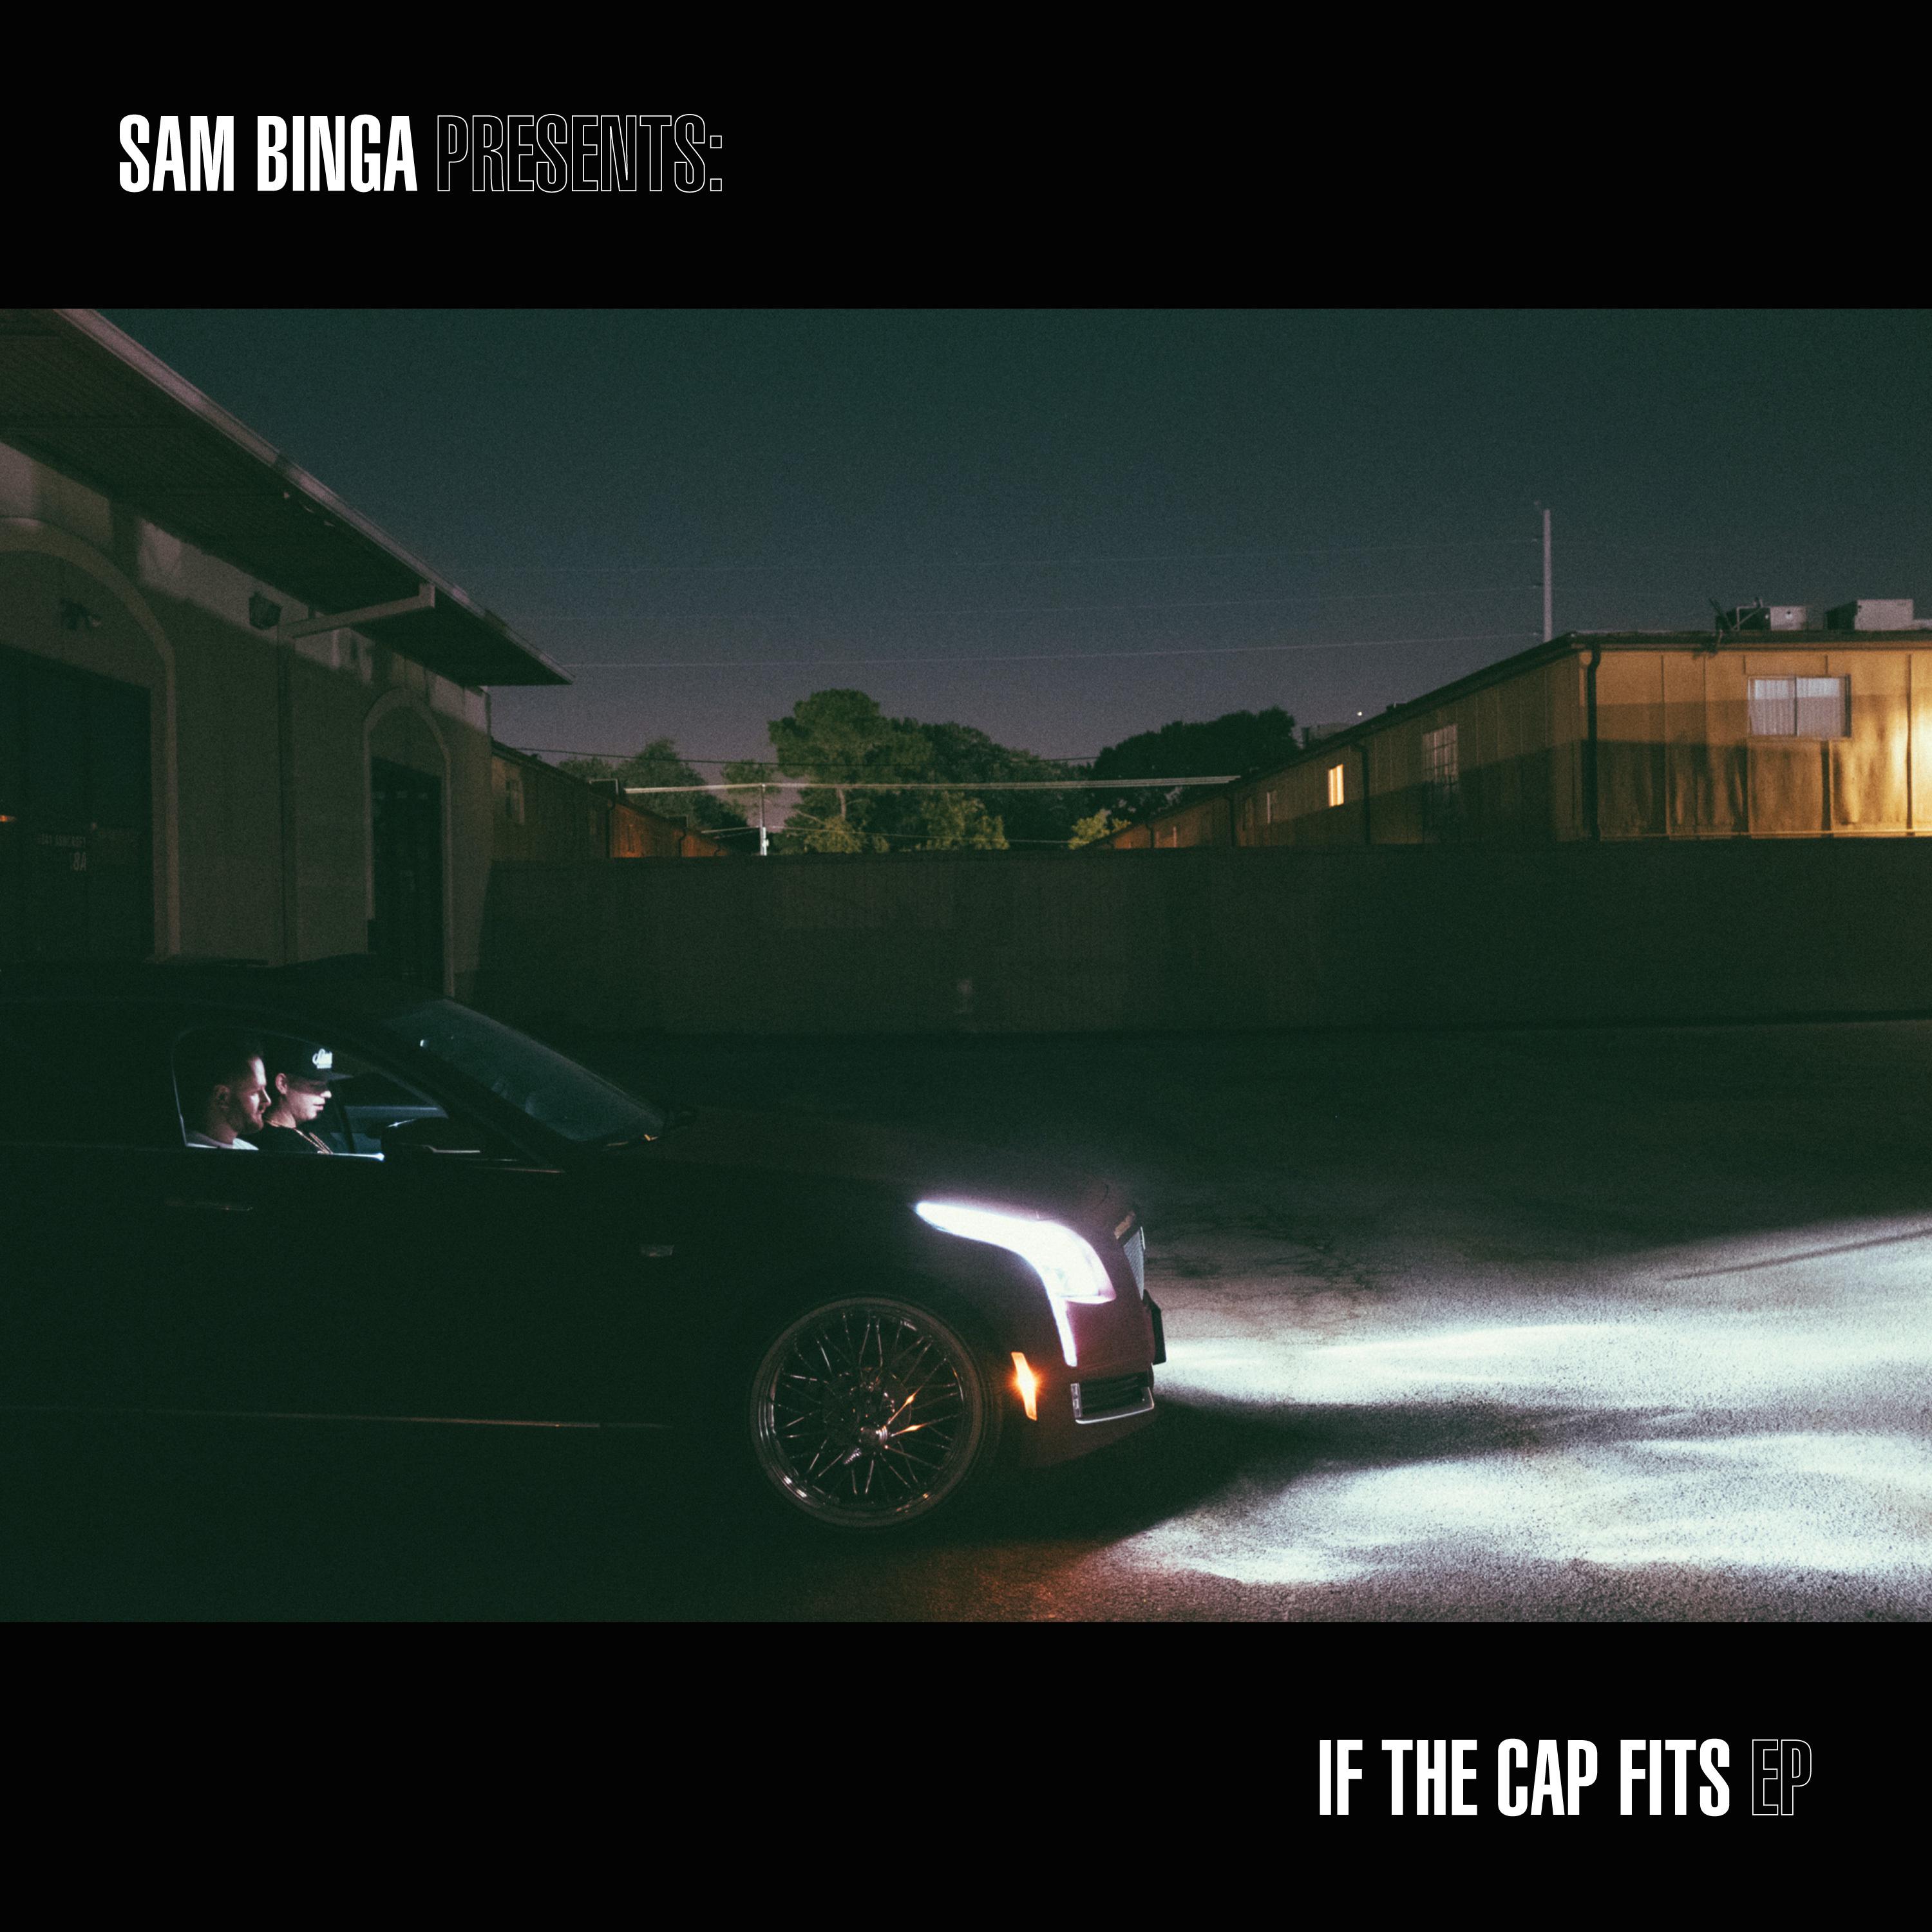 If The Cap Fits EP